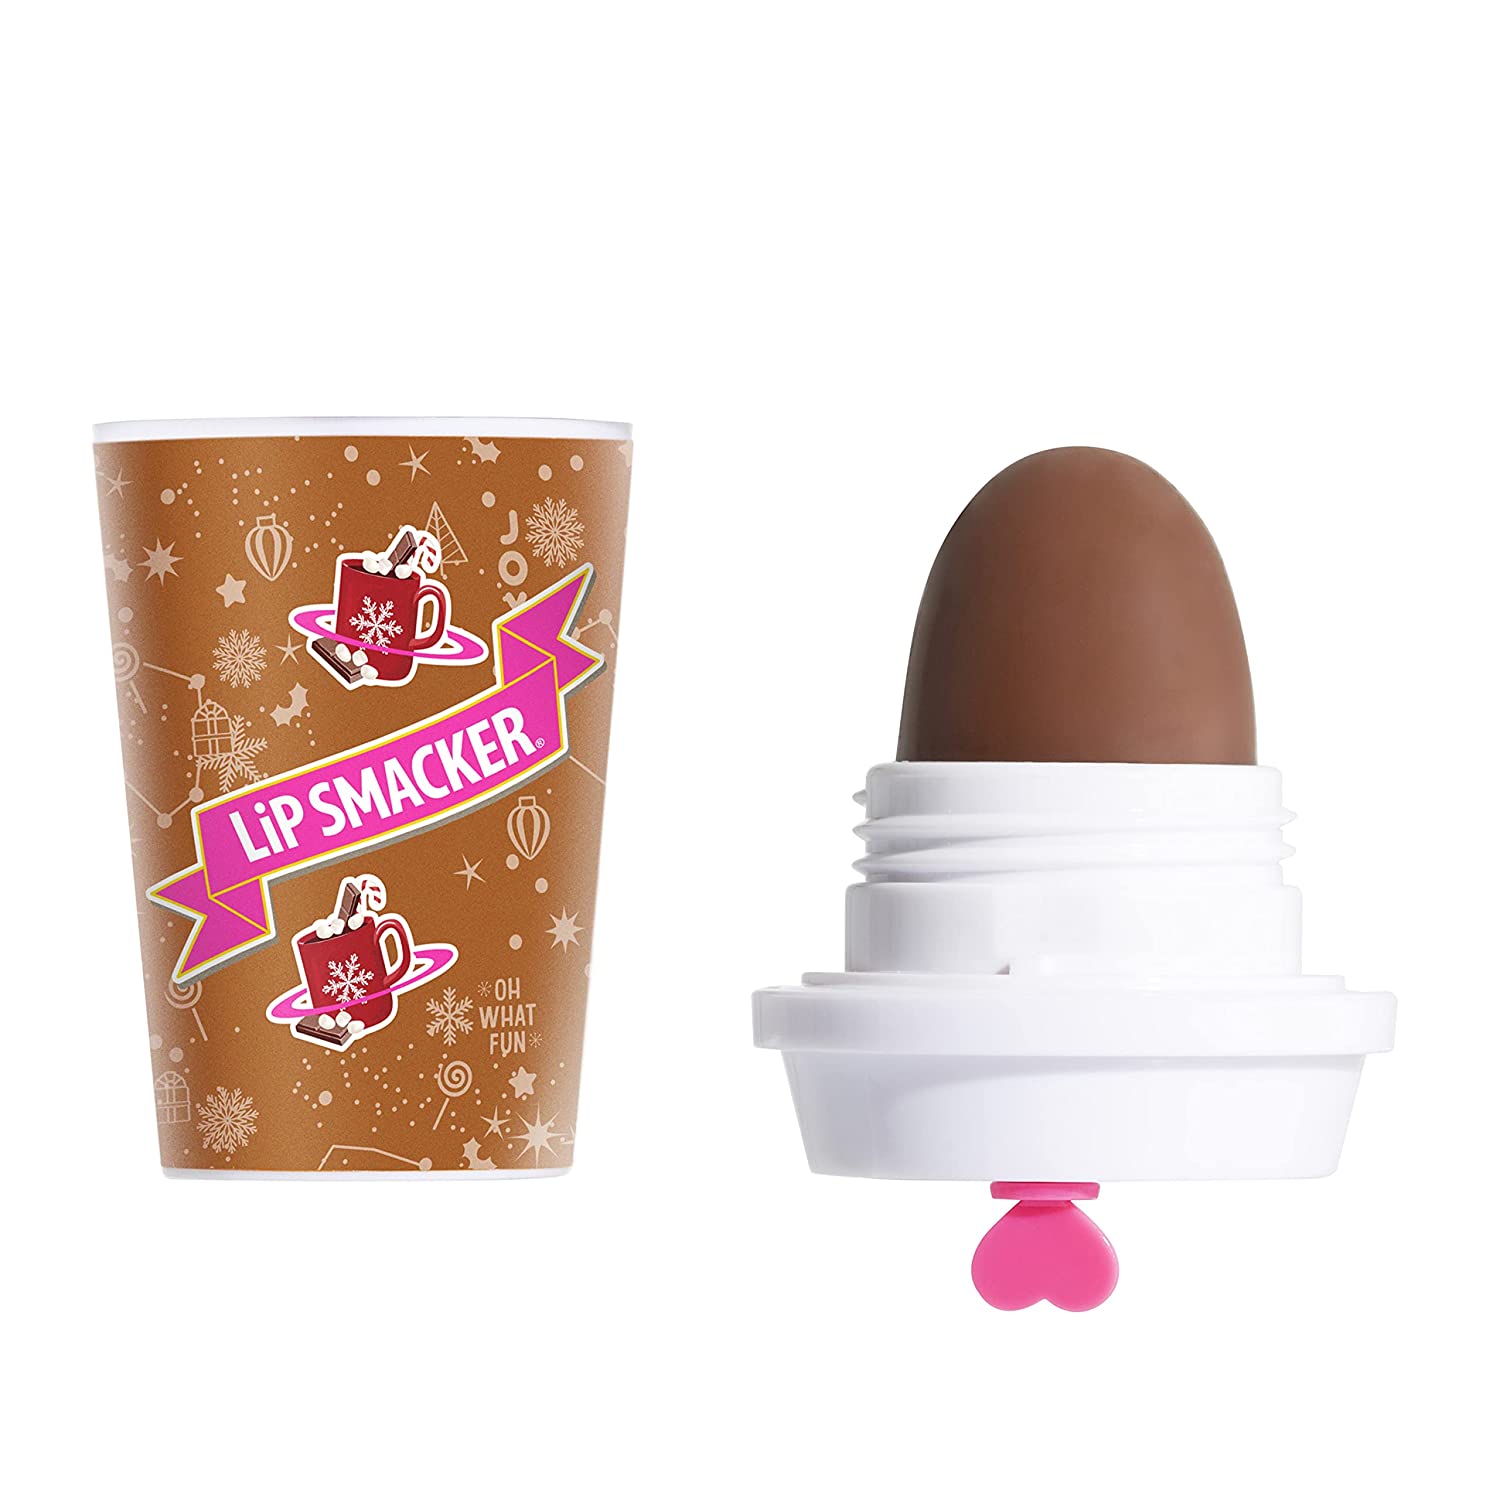 Lip Smacker Dr Pepper Cup Lip Balm Only $1.89 Shipped on